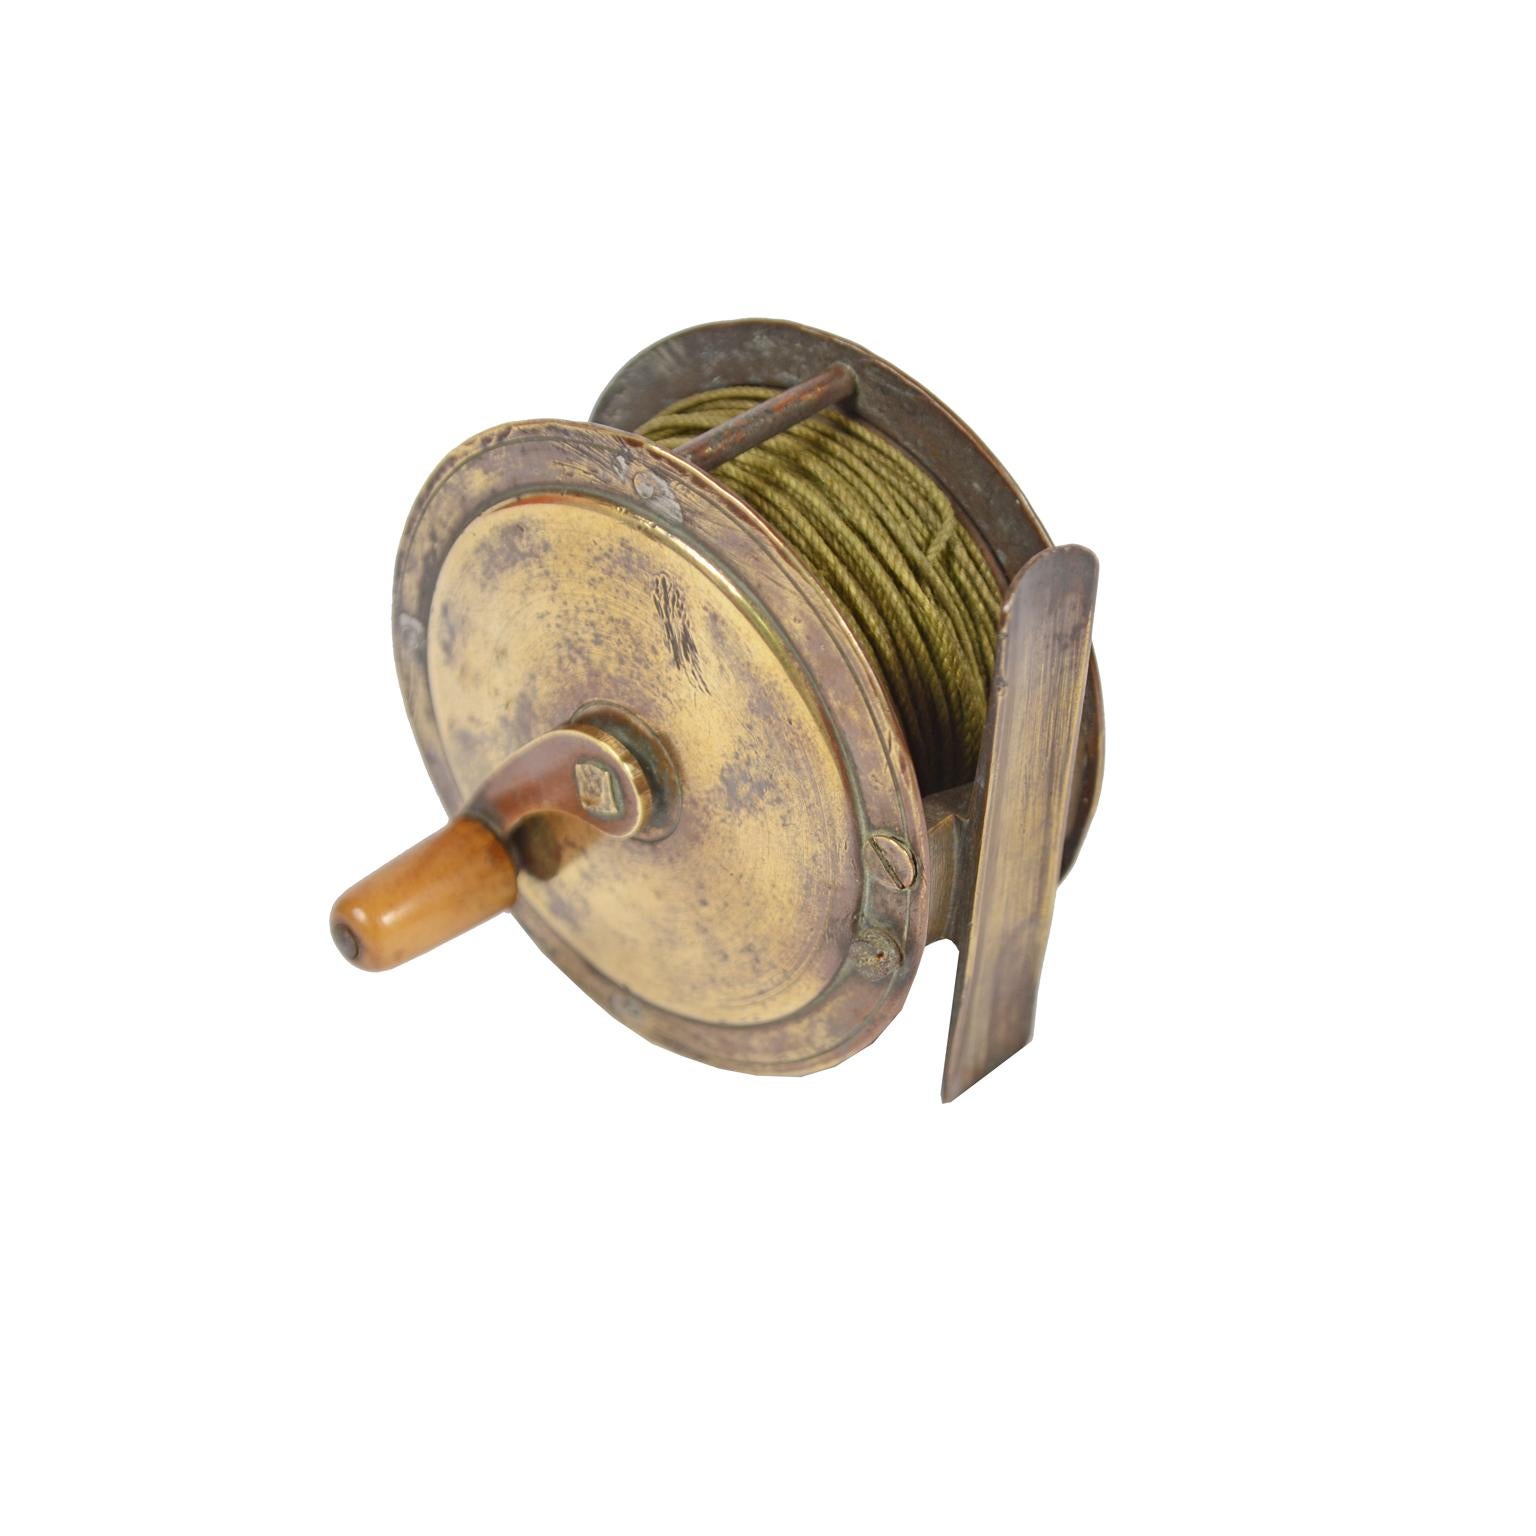 Early 20th Century English Fishing Reel Made in the Early 1900s